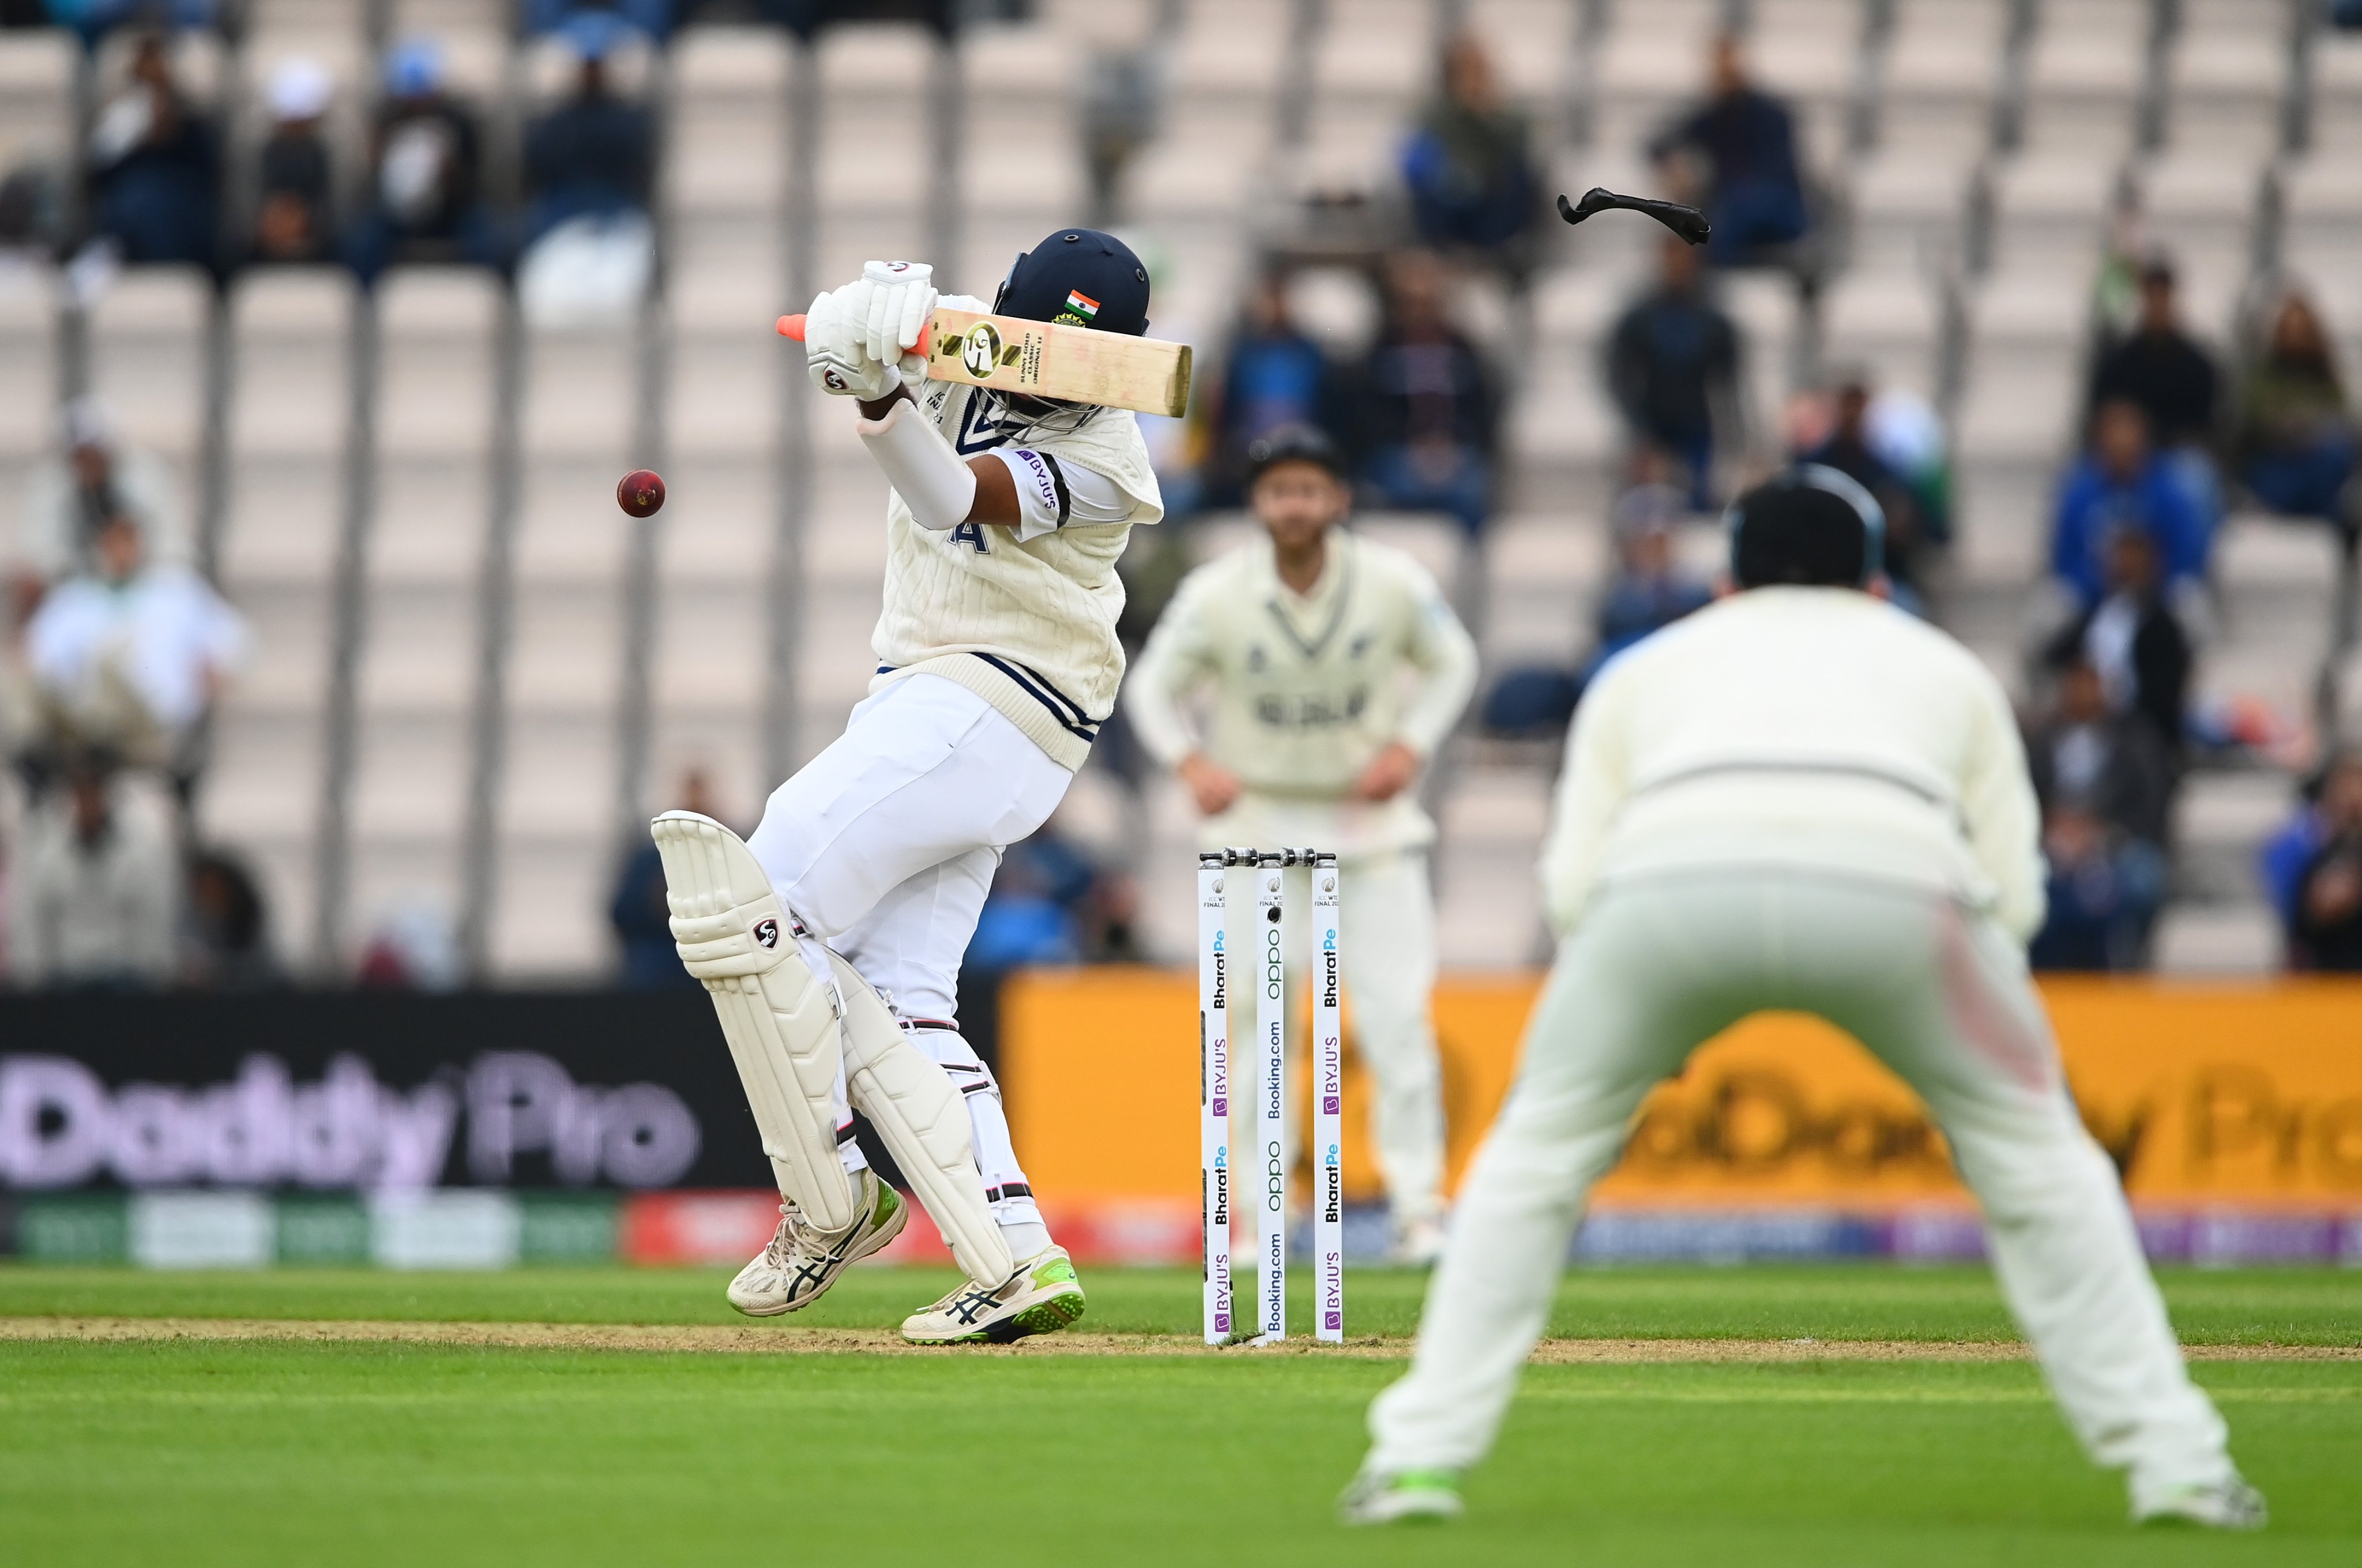 Twitter reacts to Cheteshwar Pujara being ‘smacked’ on his helmet off Wagner’s bowling